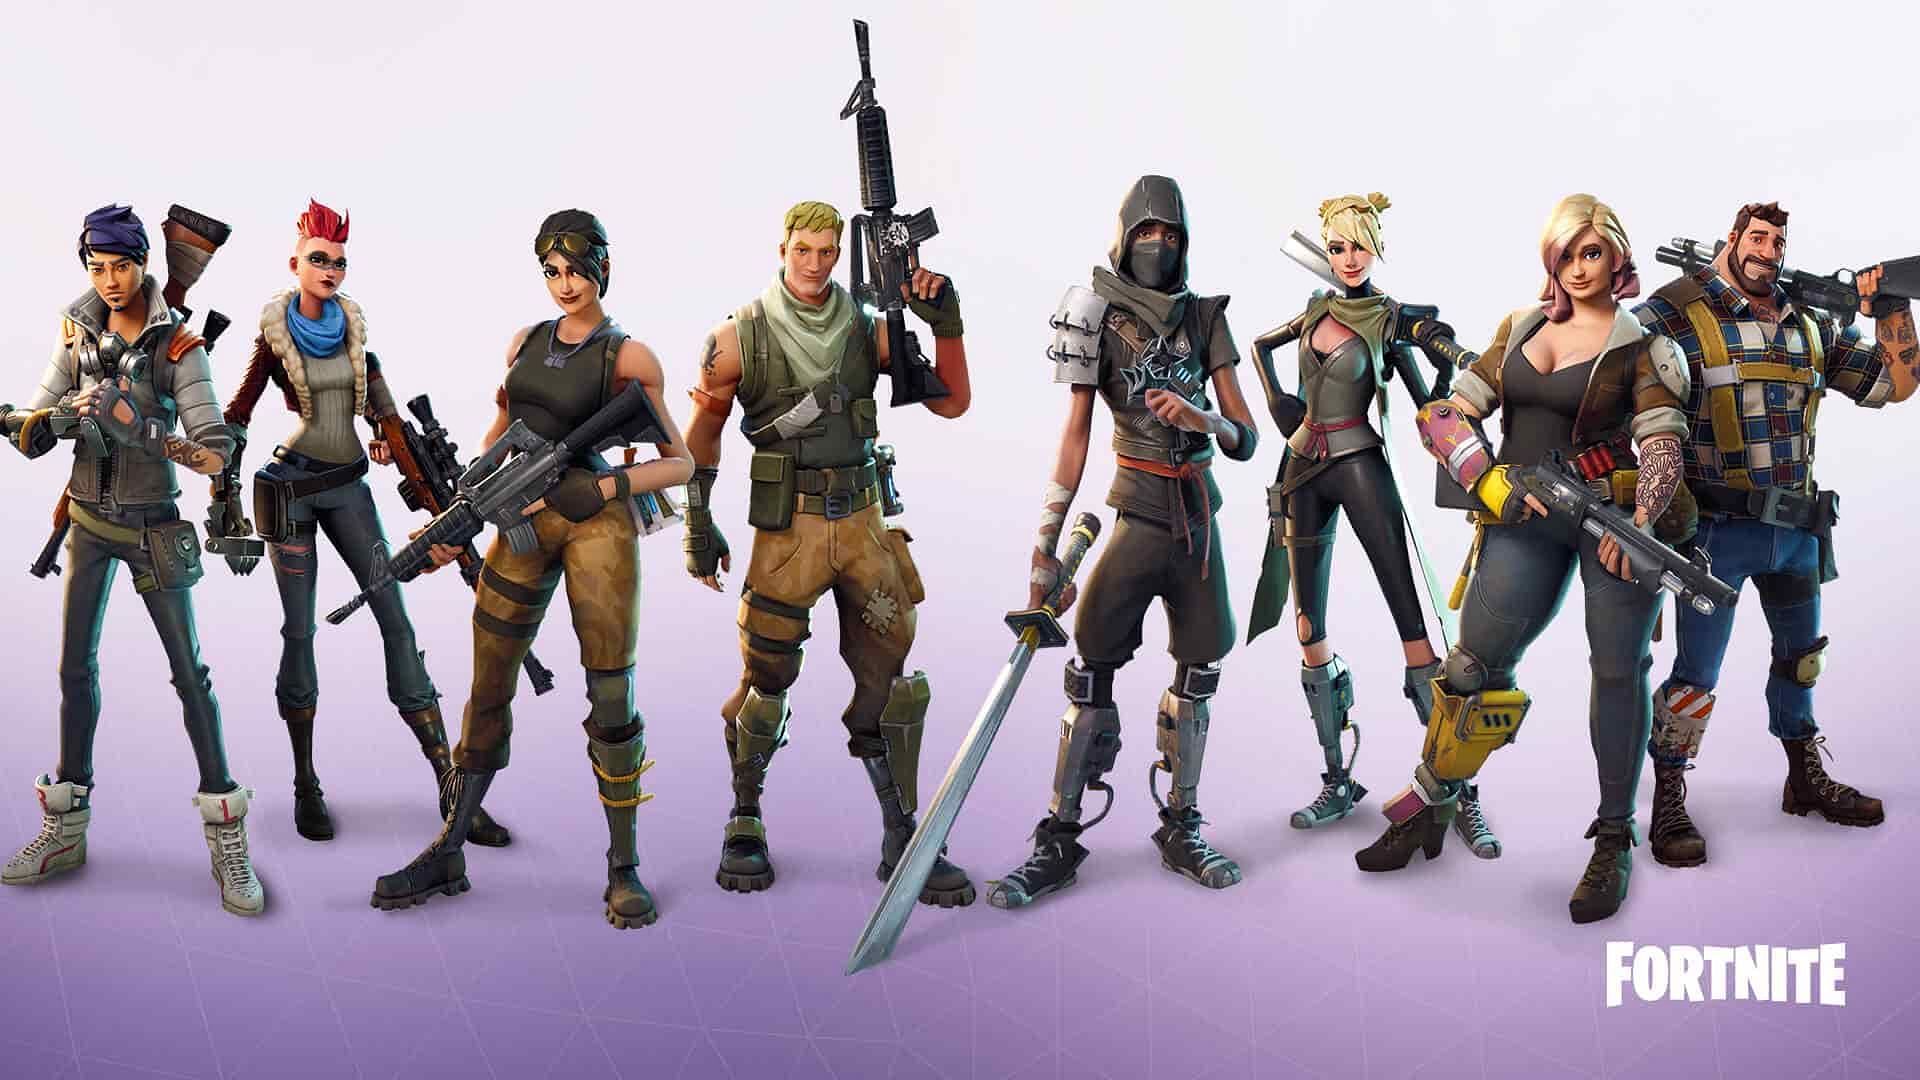 How many people play Fortnite worldwide as of February 2022?